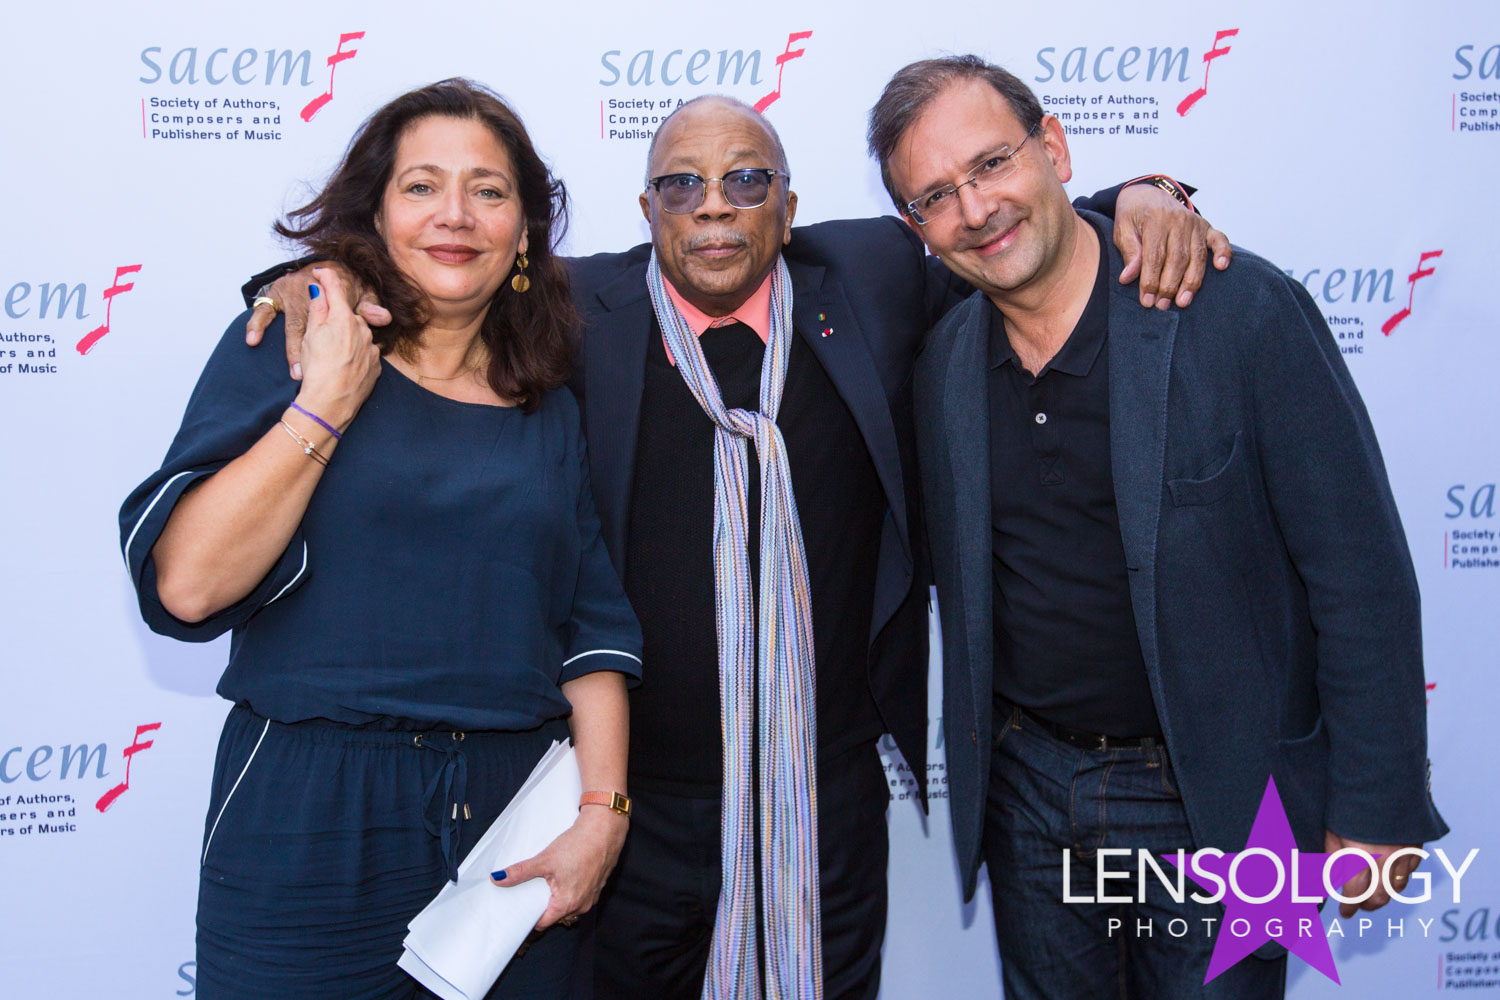 LENSOLOGY.NET - SACEM and The French Consul honors music veteran Quincy Jones with an award at the Résidence de France in Beverly Hills, CA.
All images are copyright of Lensology.net
Email: info@lensology.net
www.lensology.net